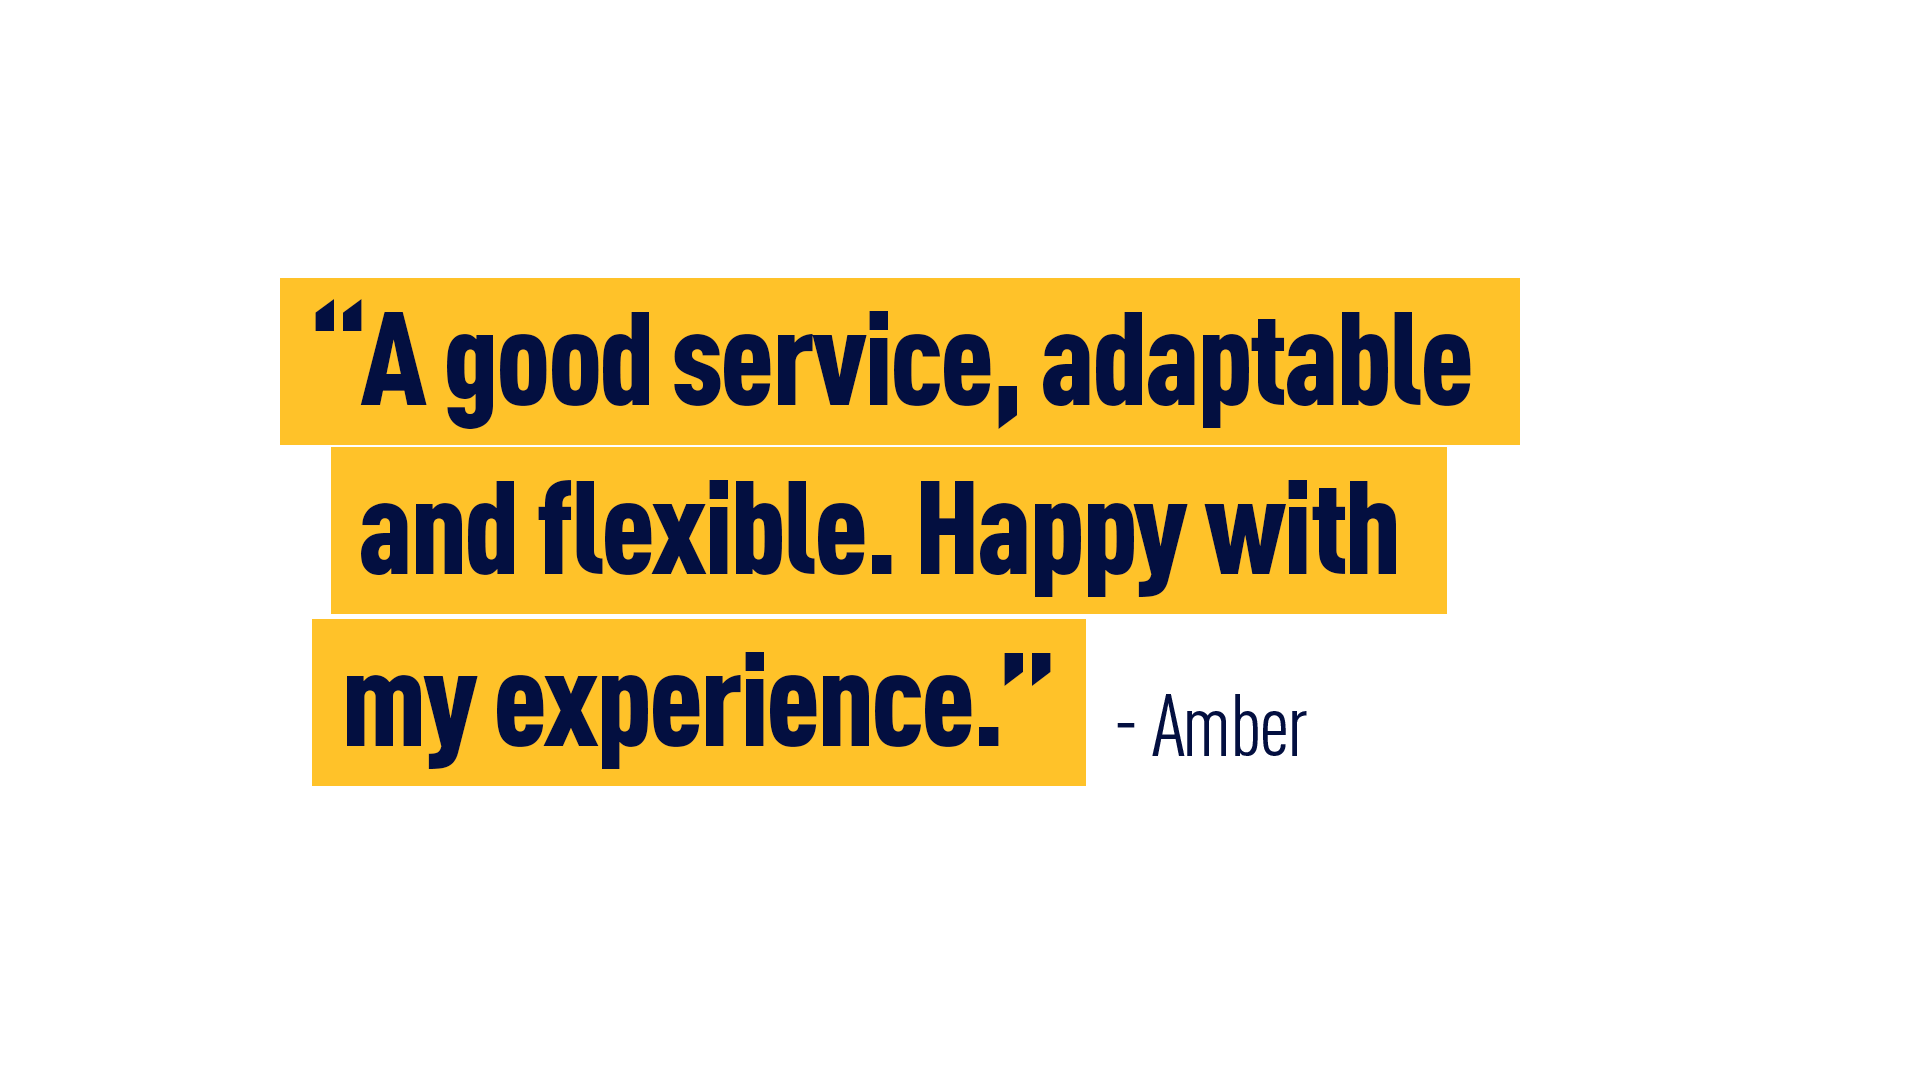 “A good service, adaptable and flexible. Happy with my experience.” Amber